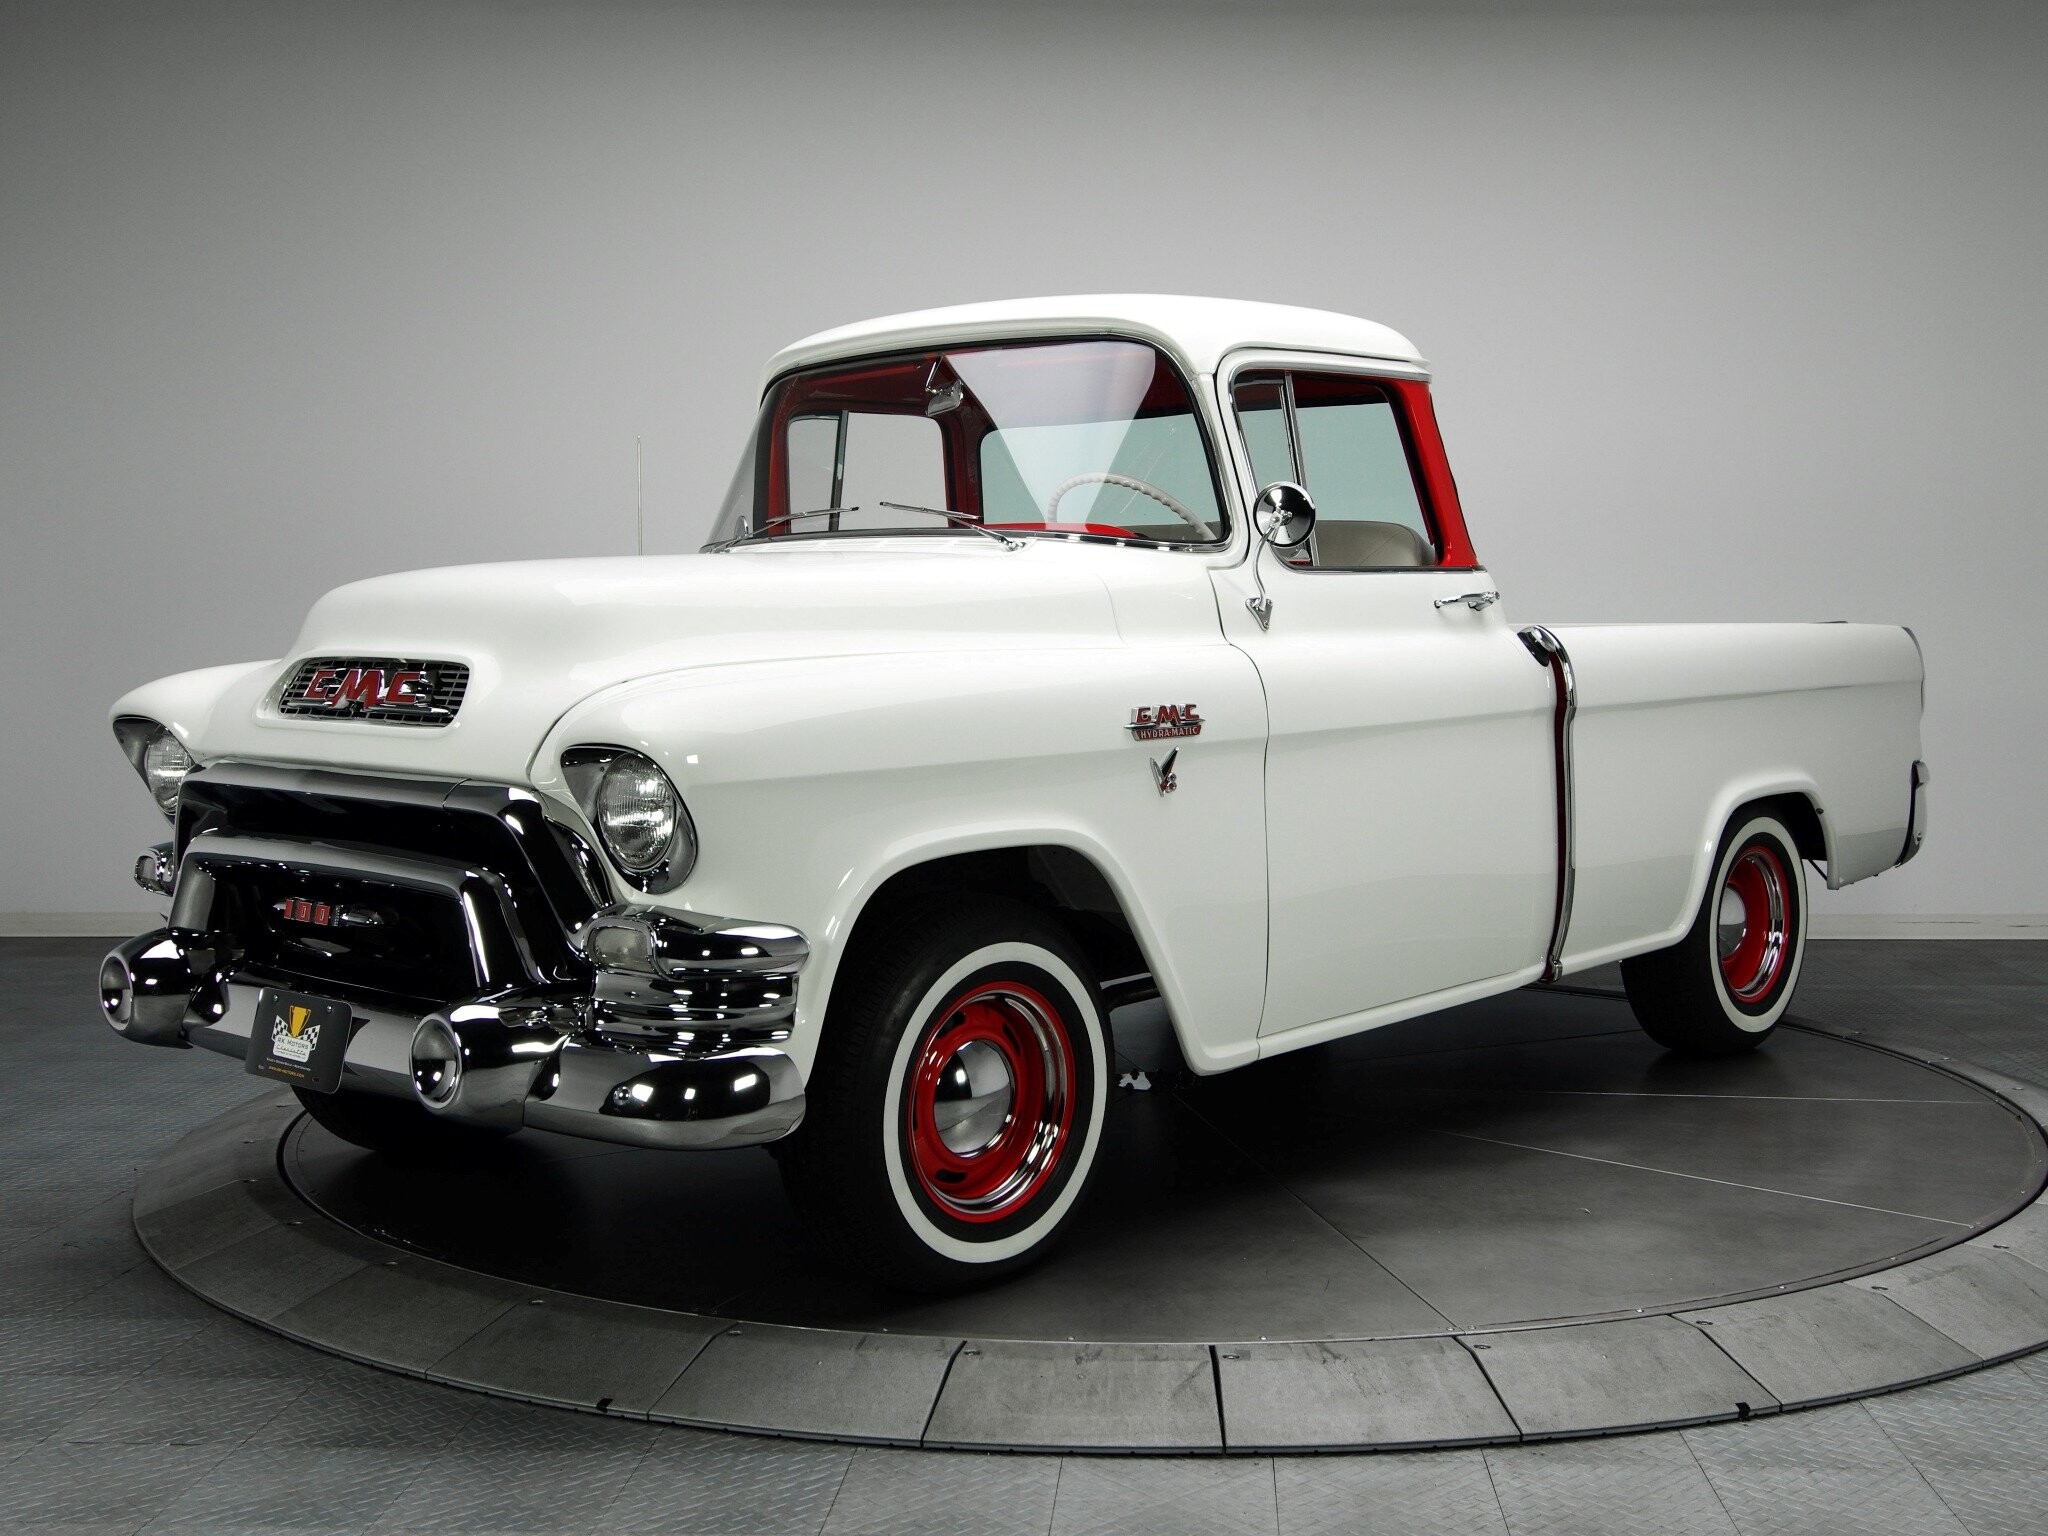 GMC: 1956 GMC Suburban Pickup, The version of the Chevrolet Cameo pickup produced by General Motors Truck Company. 2050x1540 HD Wallpaper.